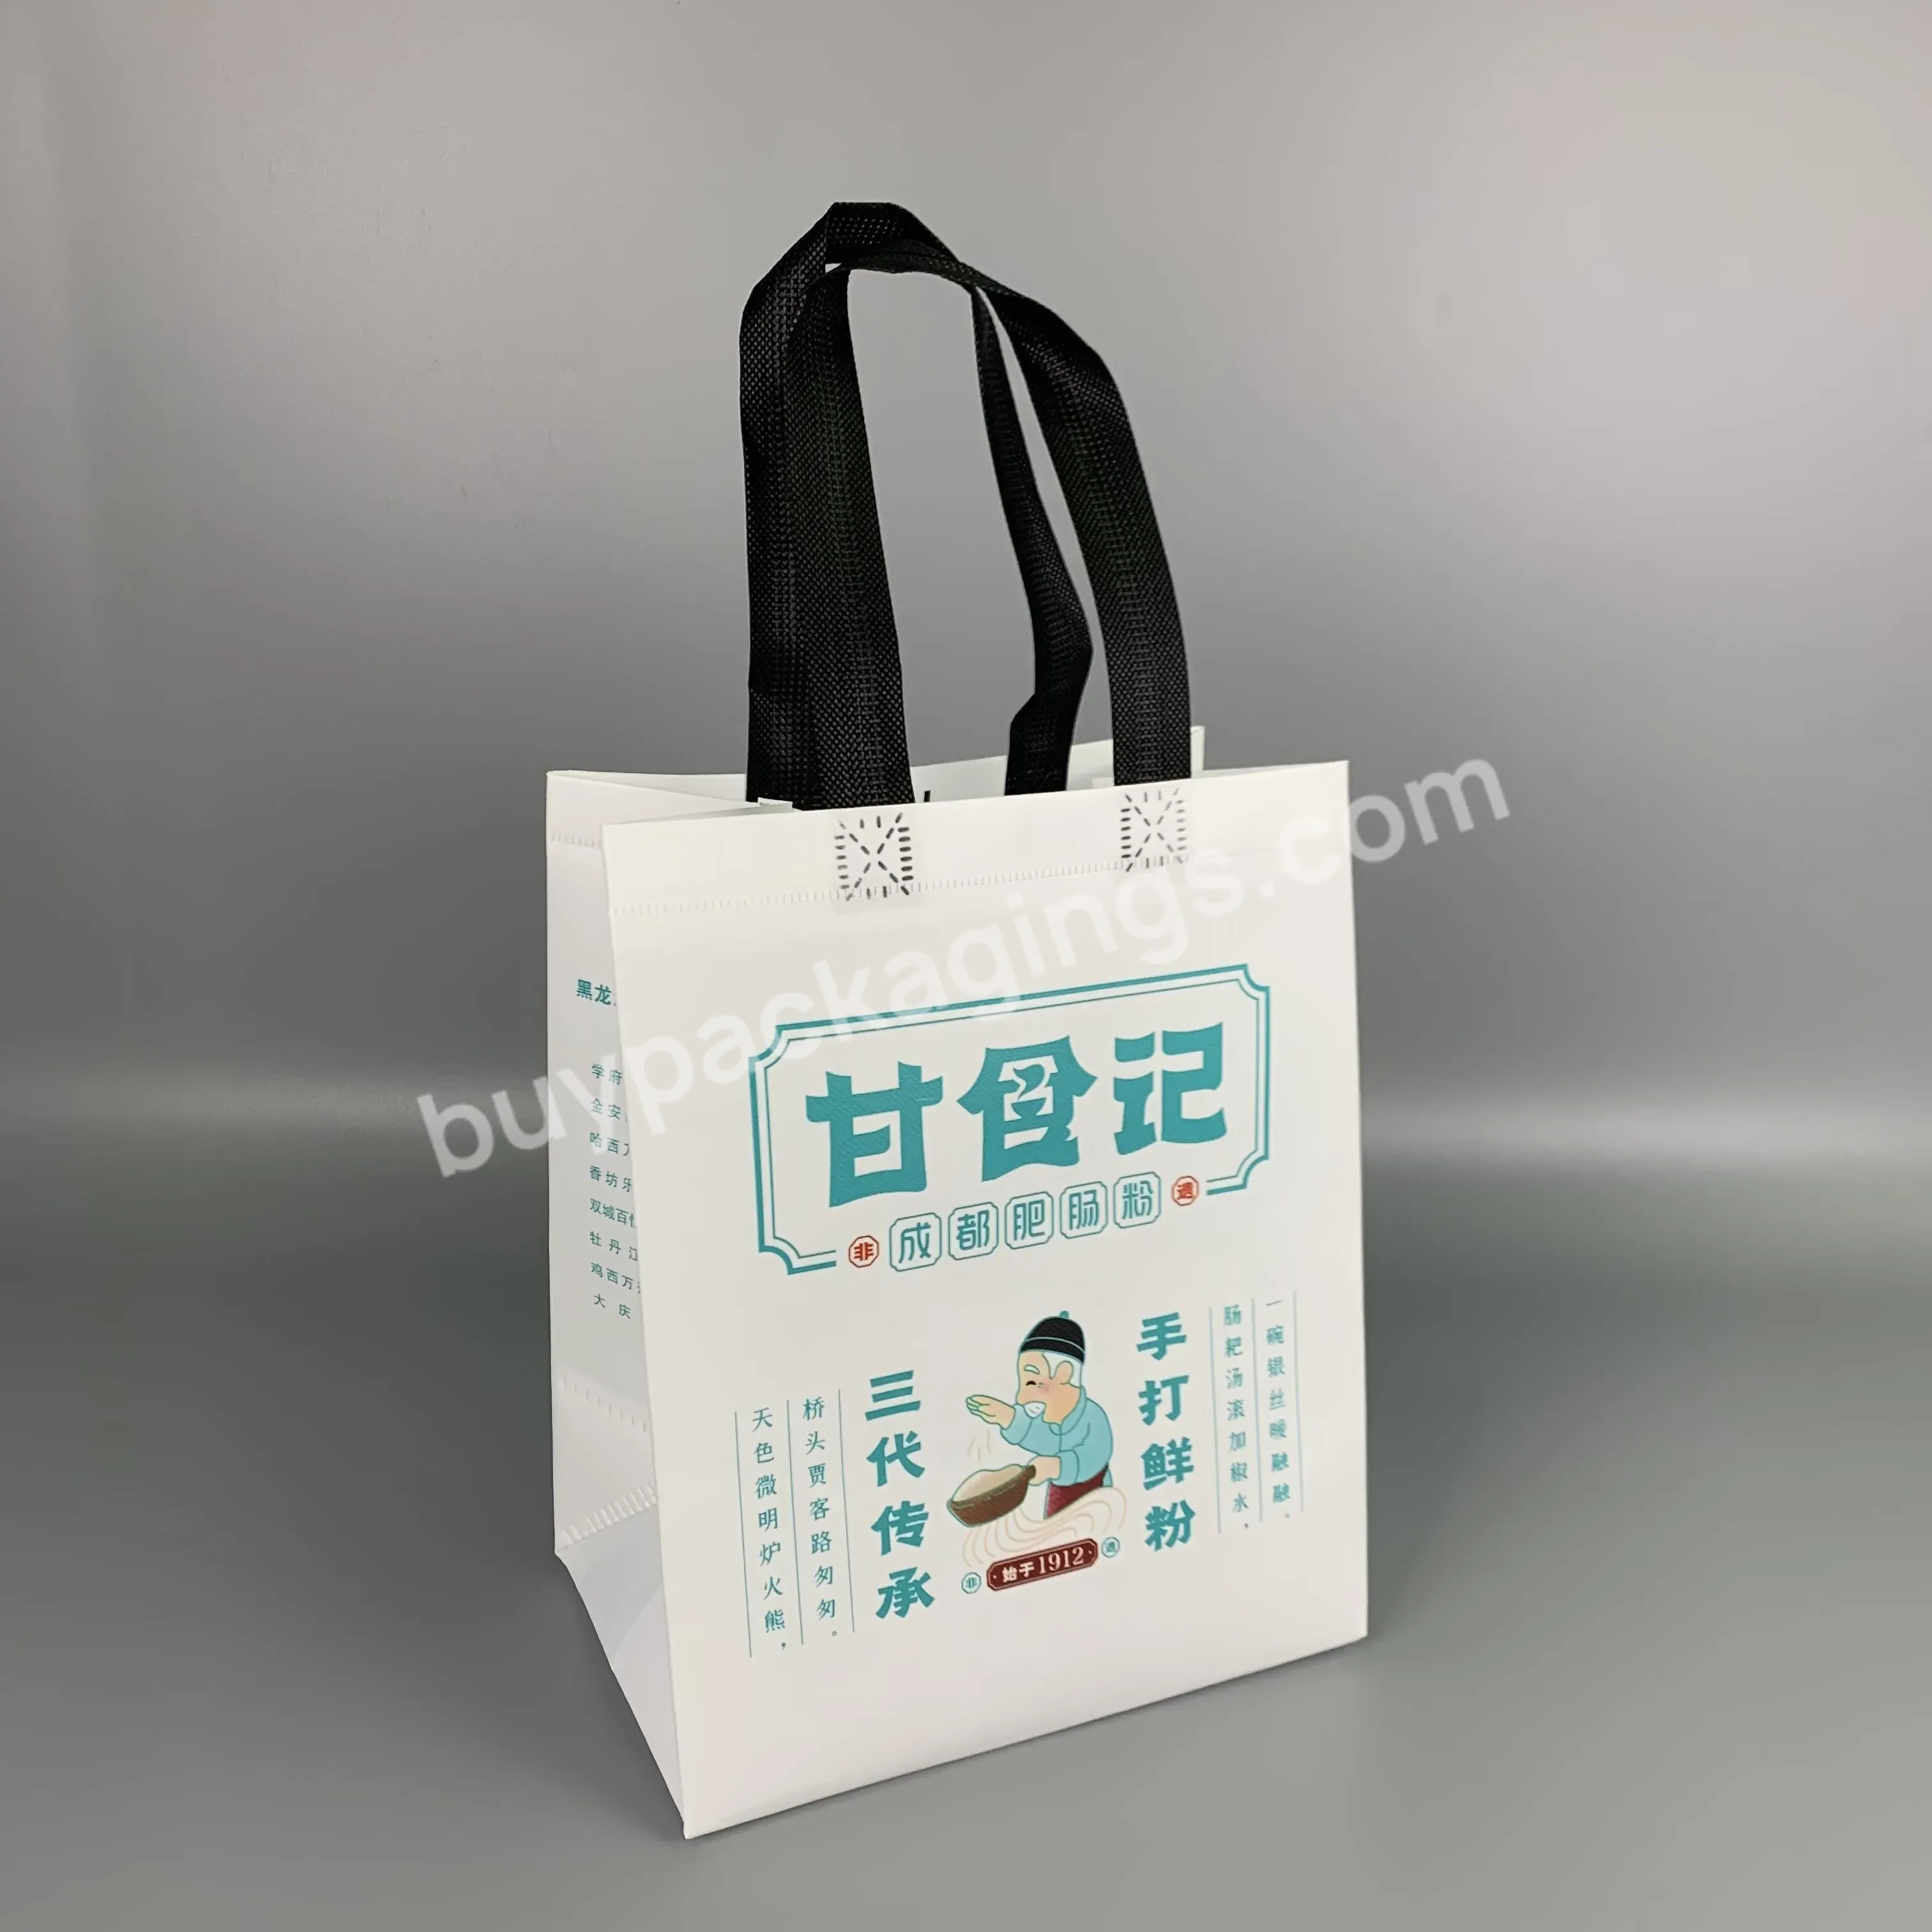 New Style Fashionable Degradable Oilproof Foldable Customized Non Woven Bag For Take-out Food Packing - Buy Fashionable Tote Bag,Foldable Food Bag,Customized Non Woven Bag.